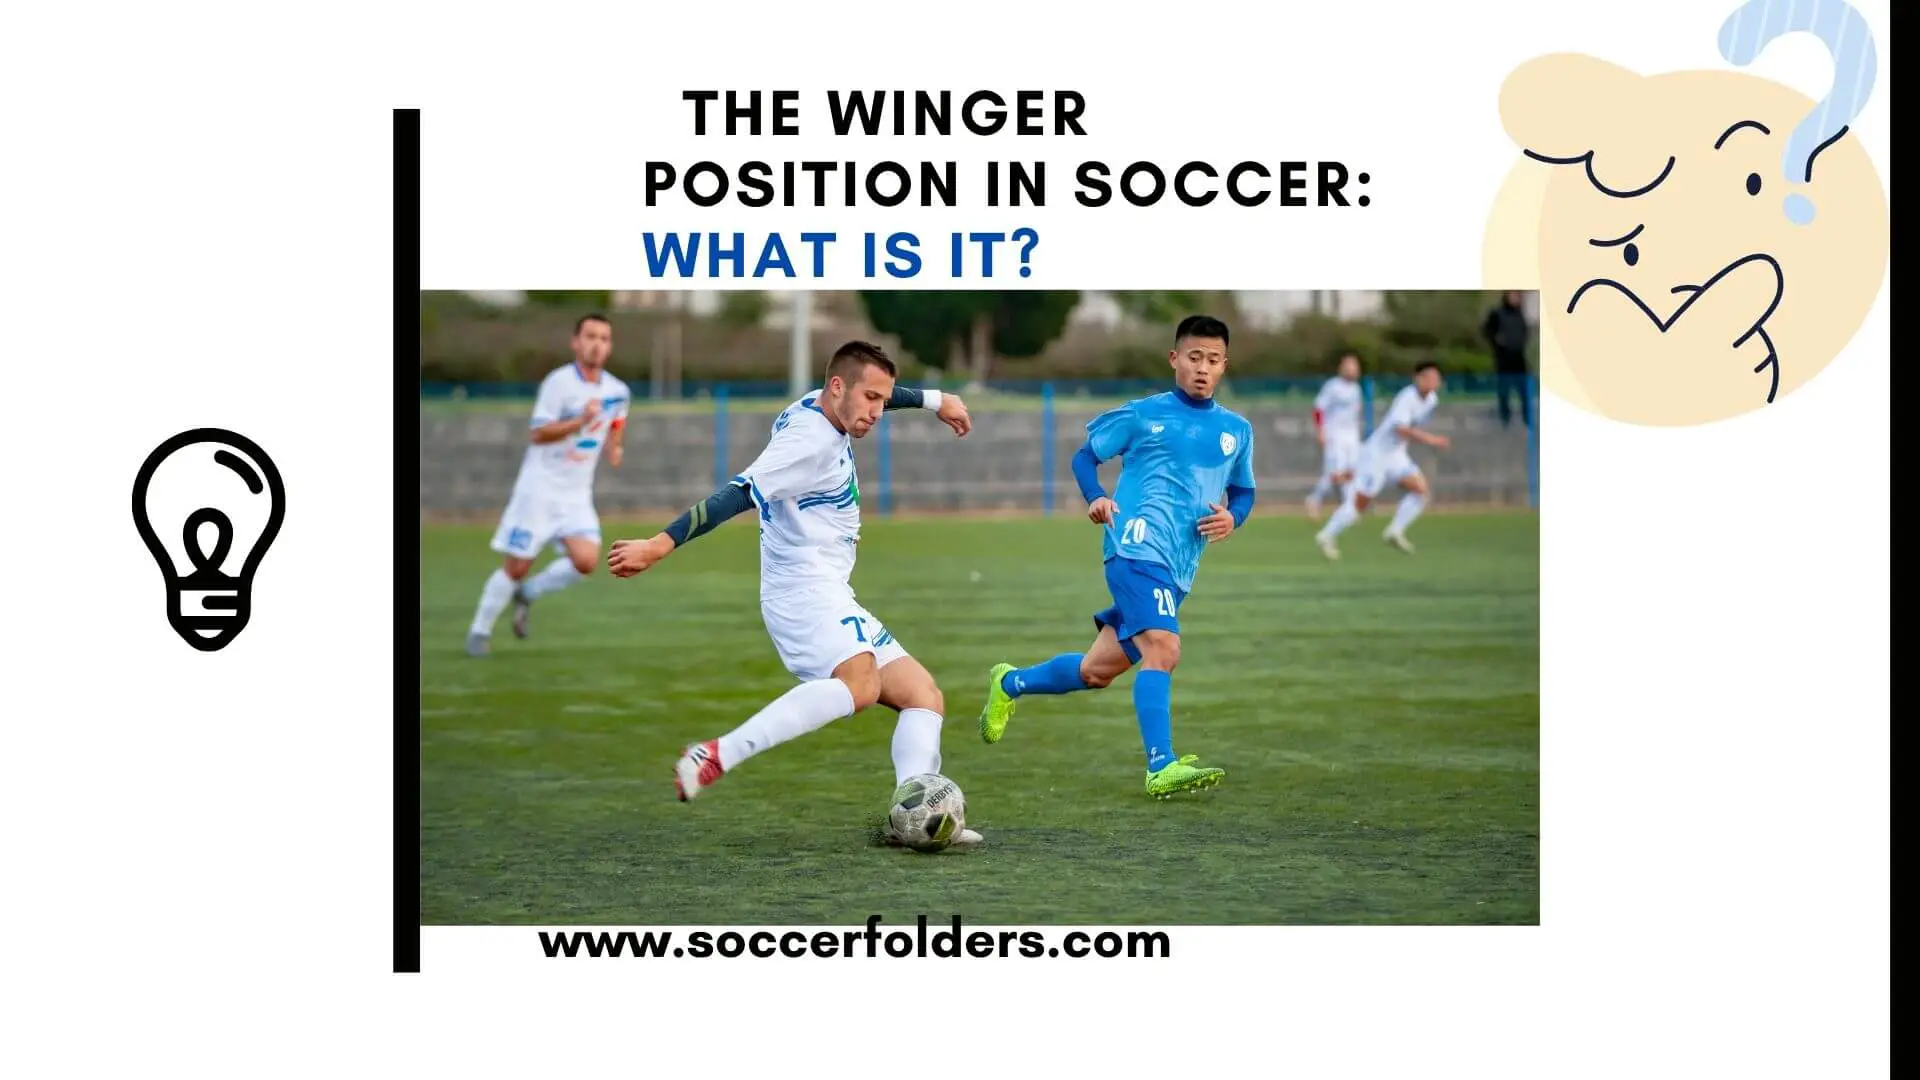 Winger position in soccer - Featured Image